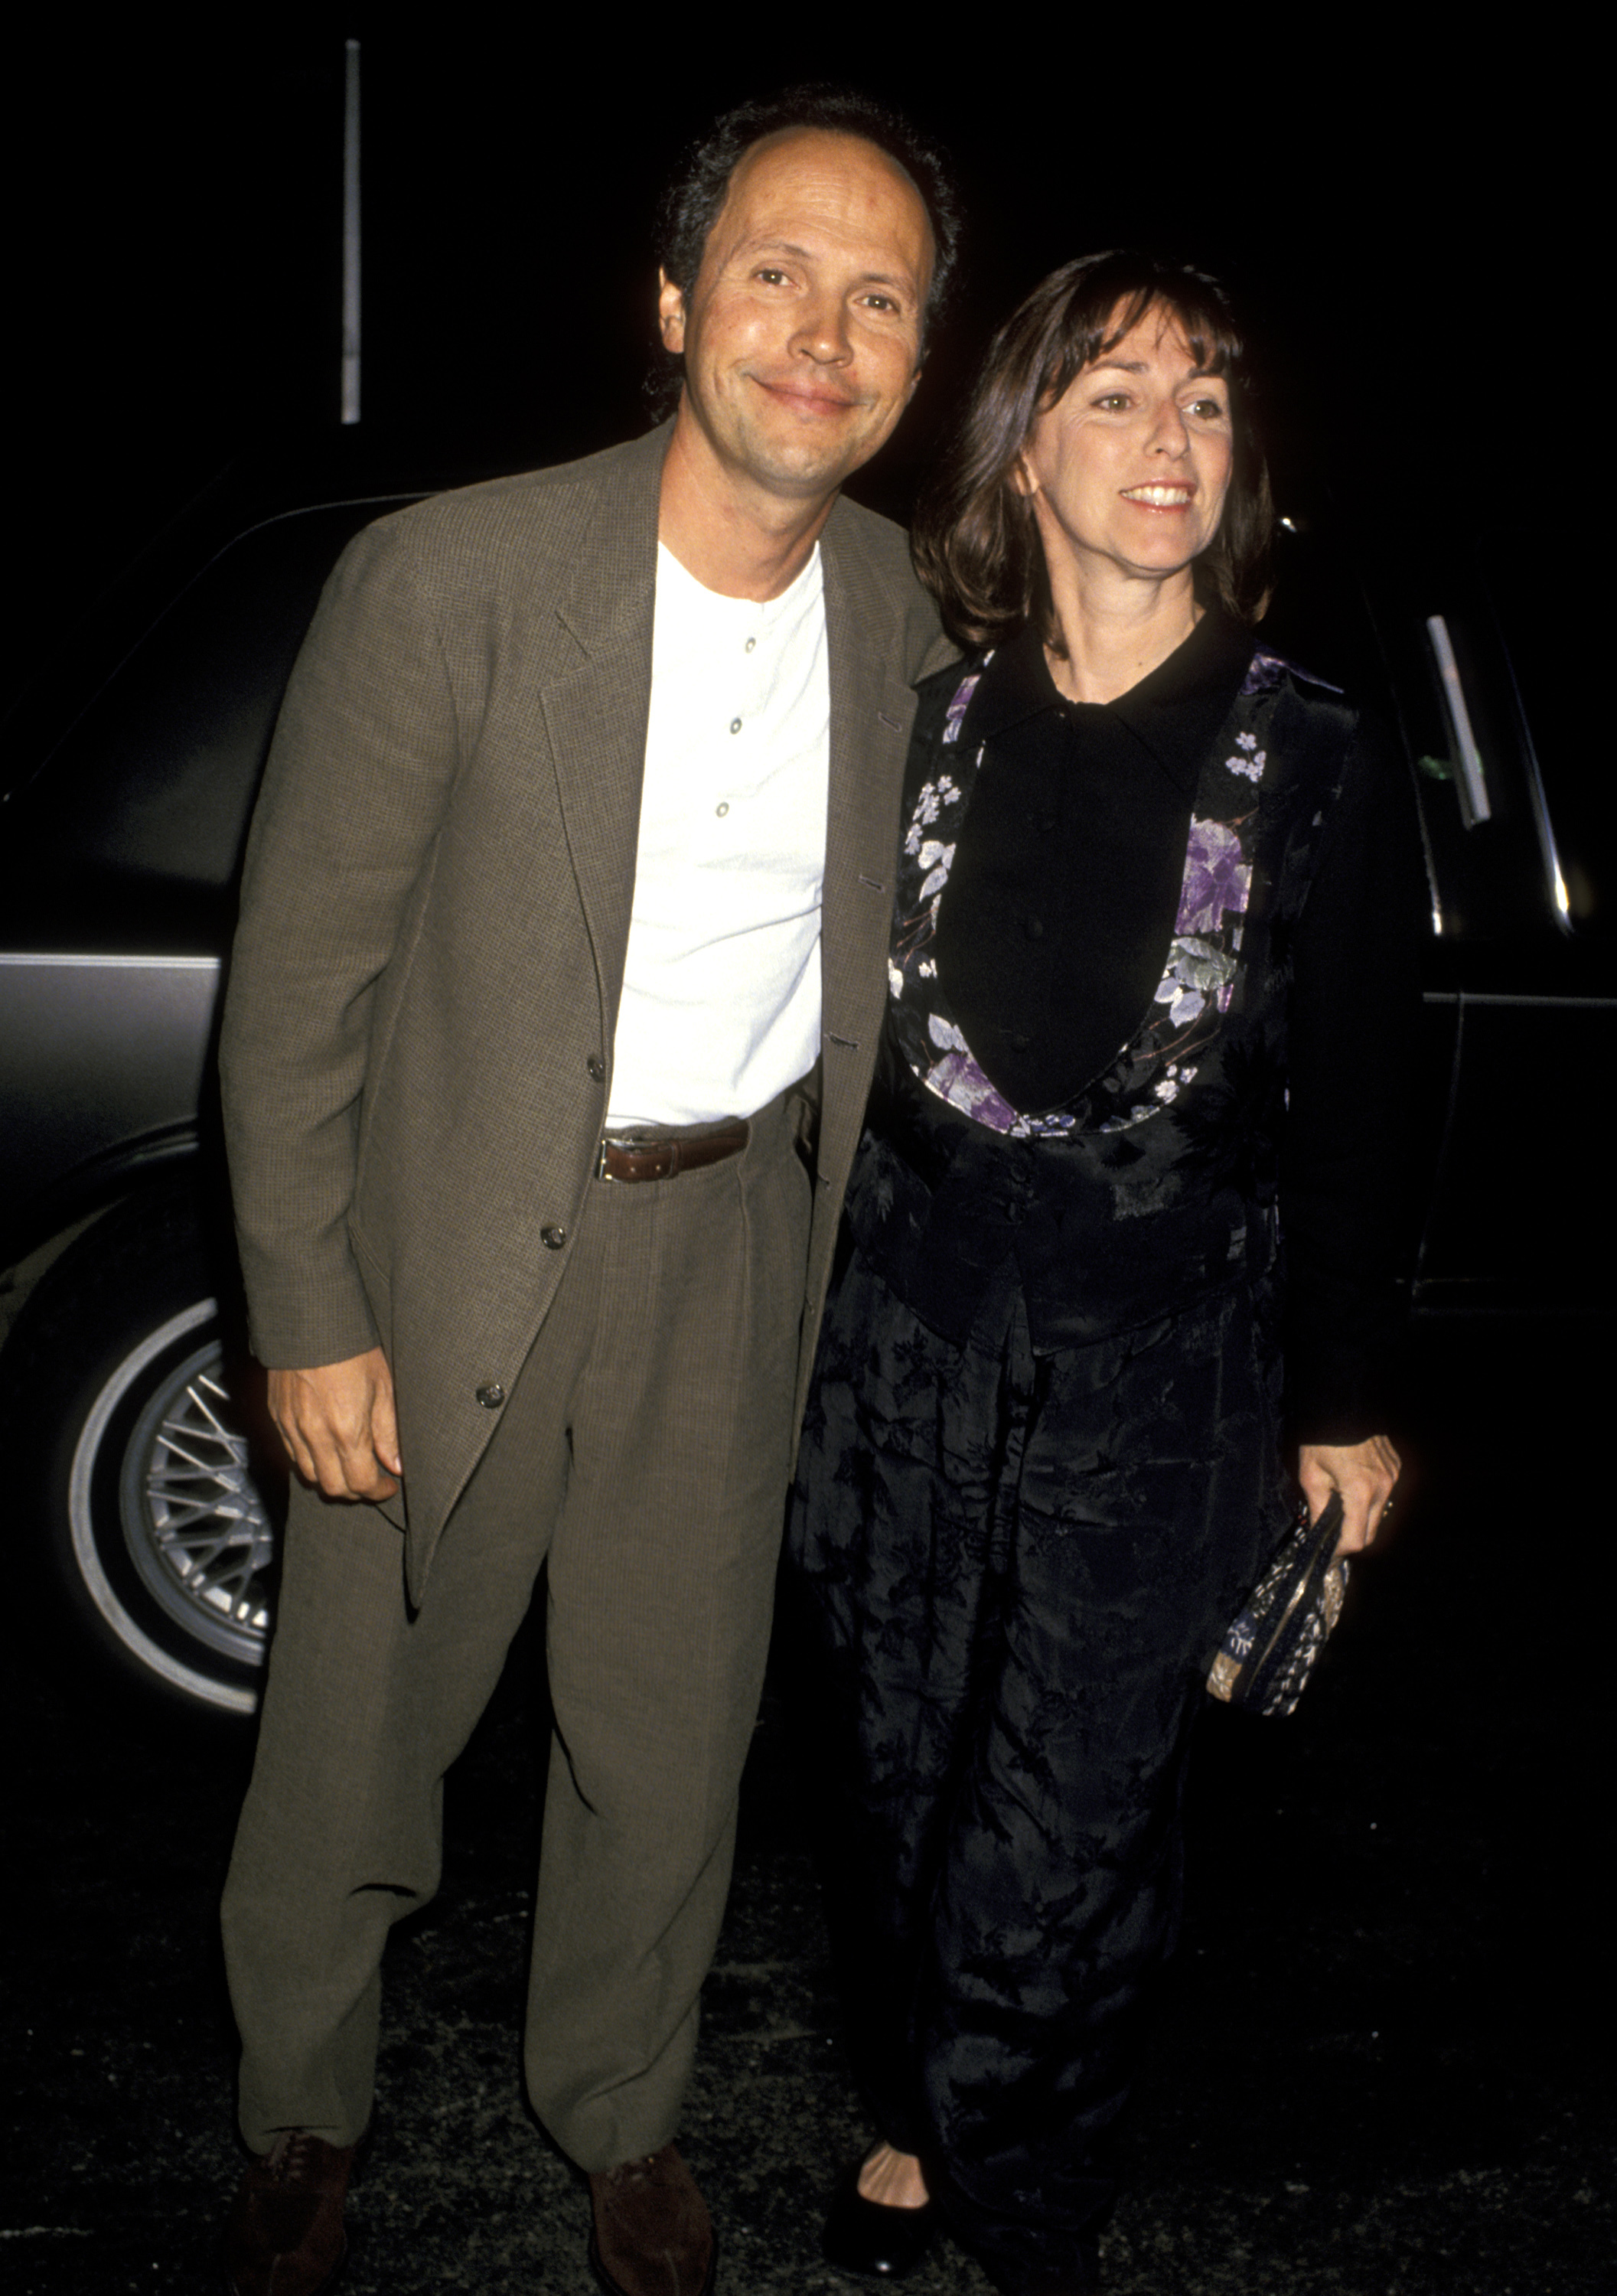 Billy Crystal and Wife Janice Crystal during a New York Knicks vs Indiana Pacers Basketball Game at Madison Square Garden on June 1, 1994 in New York City, New York, United States. | Source: Getty Images